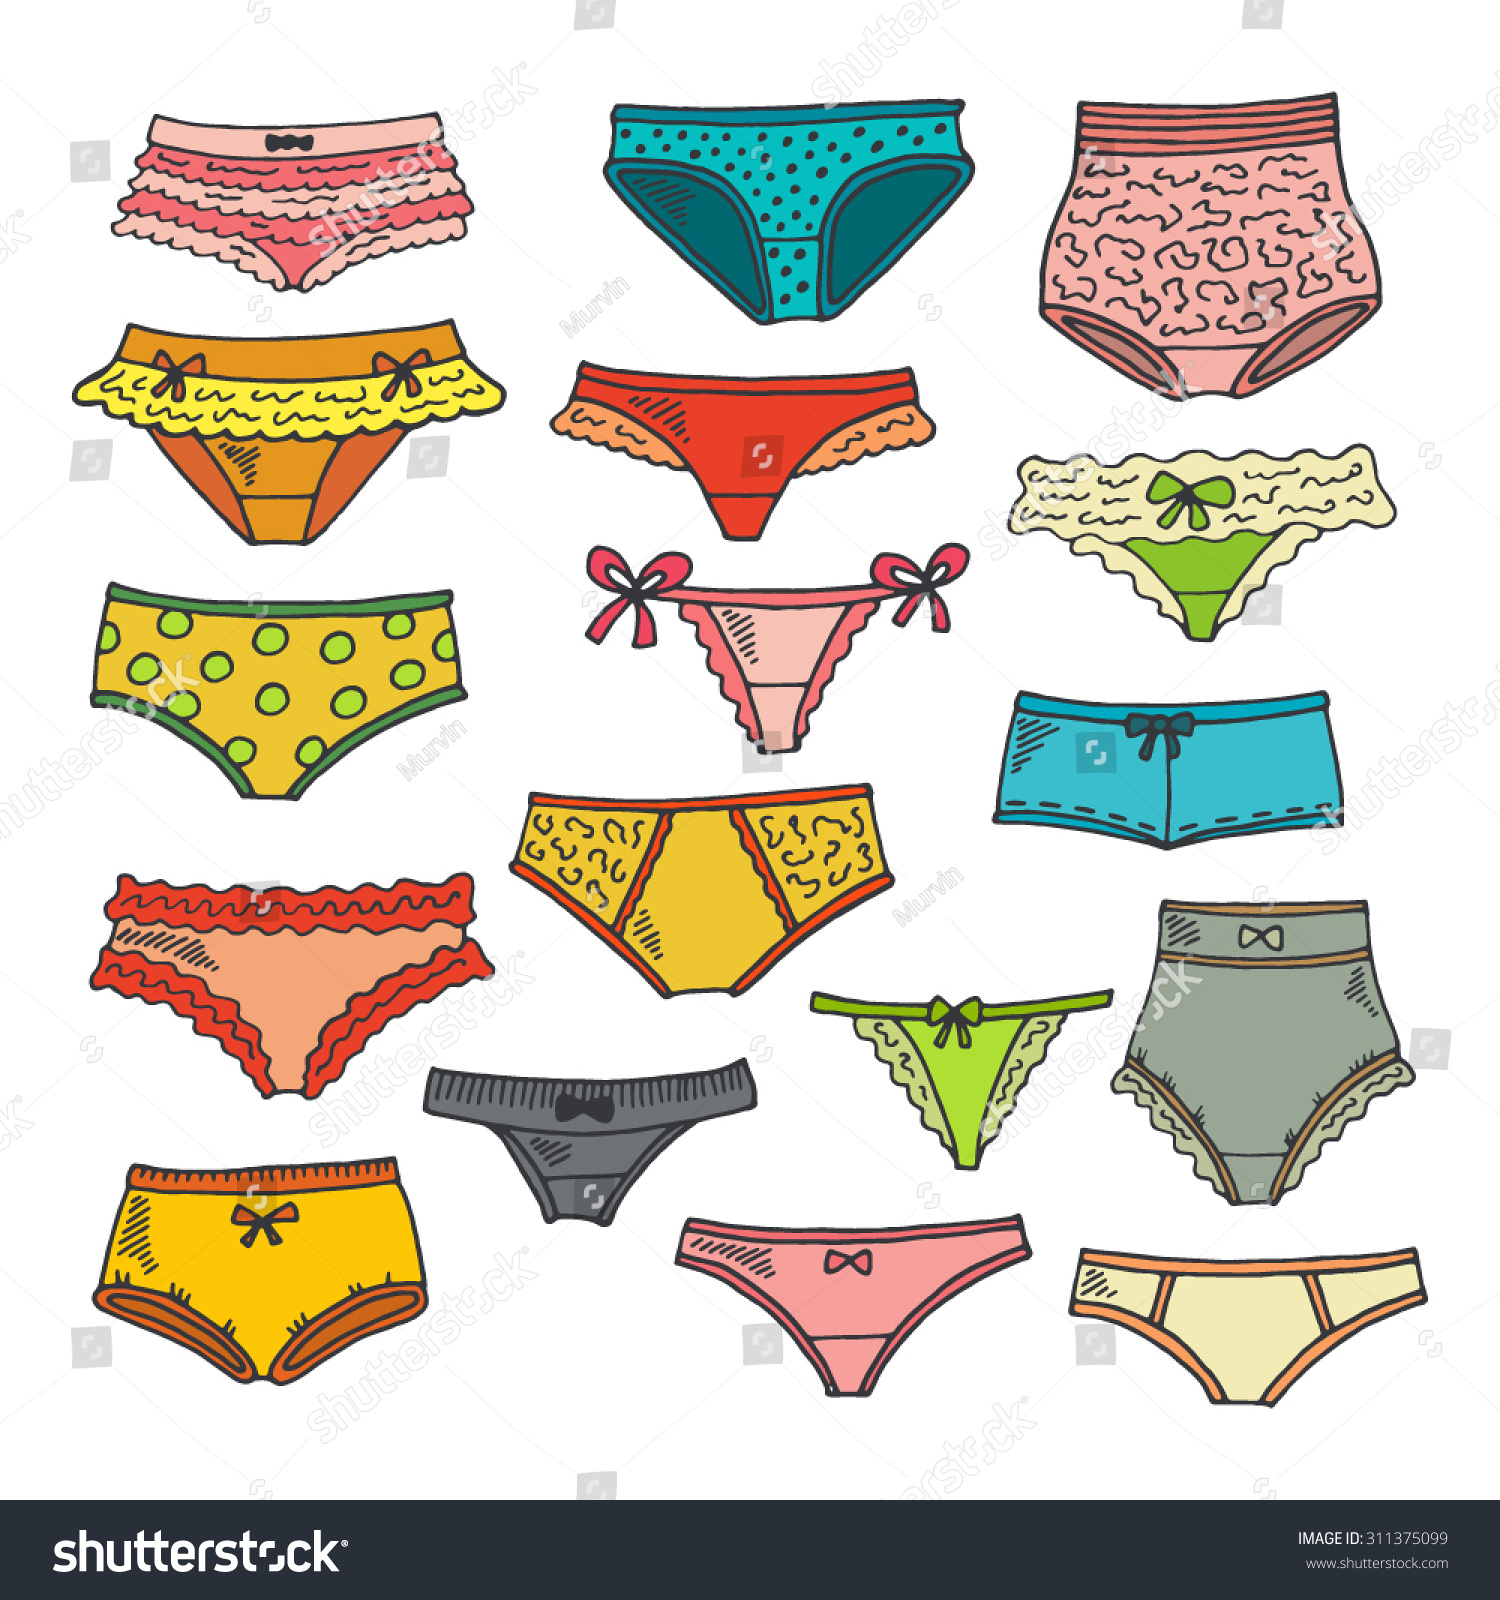 Hand Drawn Ink Isolated Lace Panties Stock Vector 311375099 Shutterstock